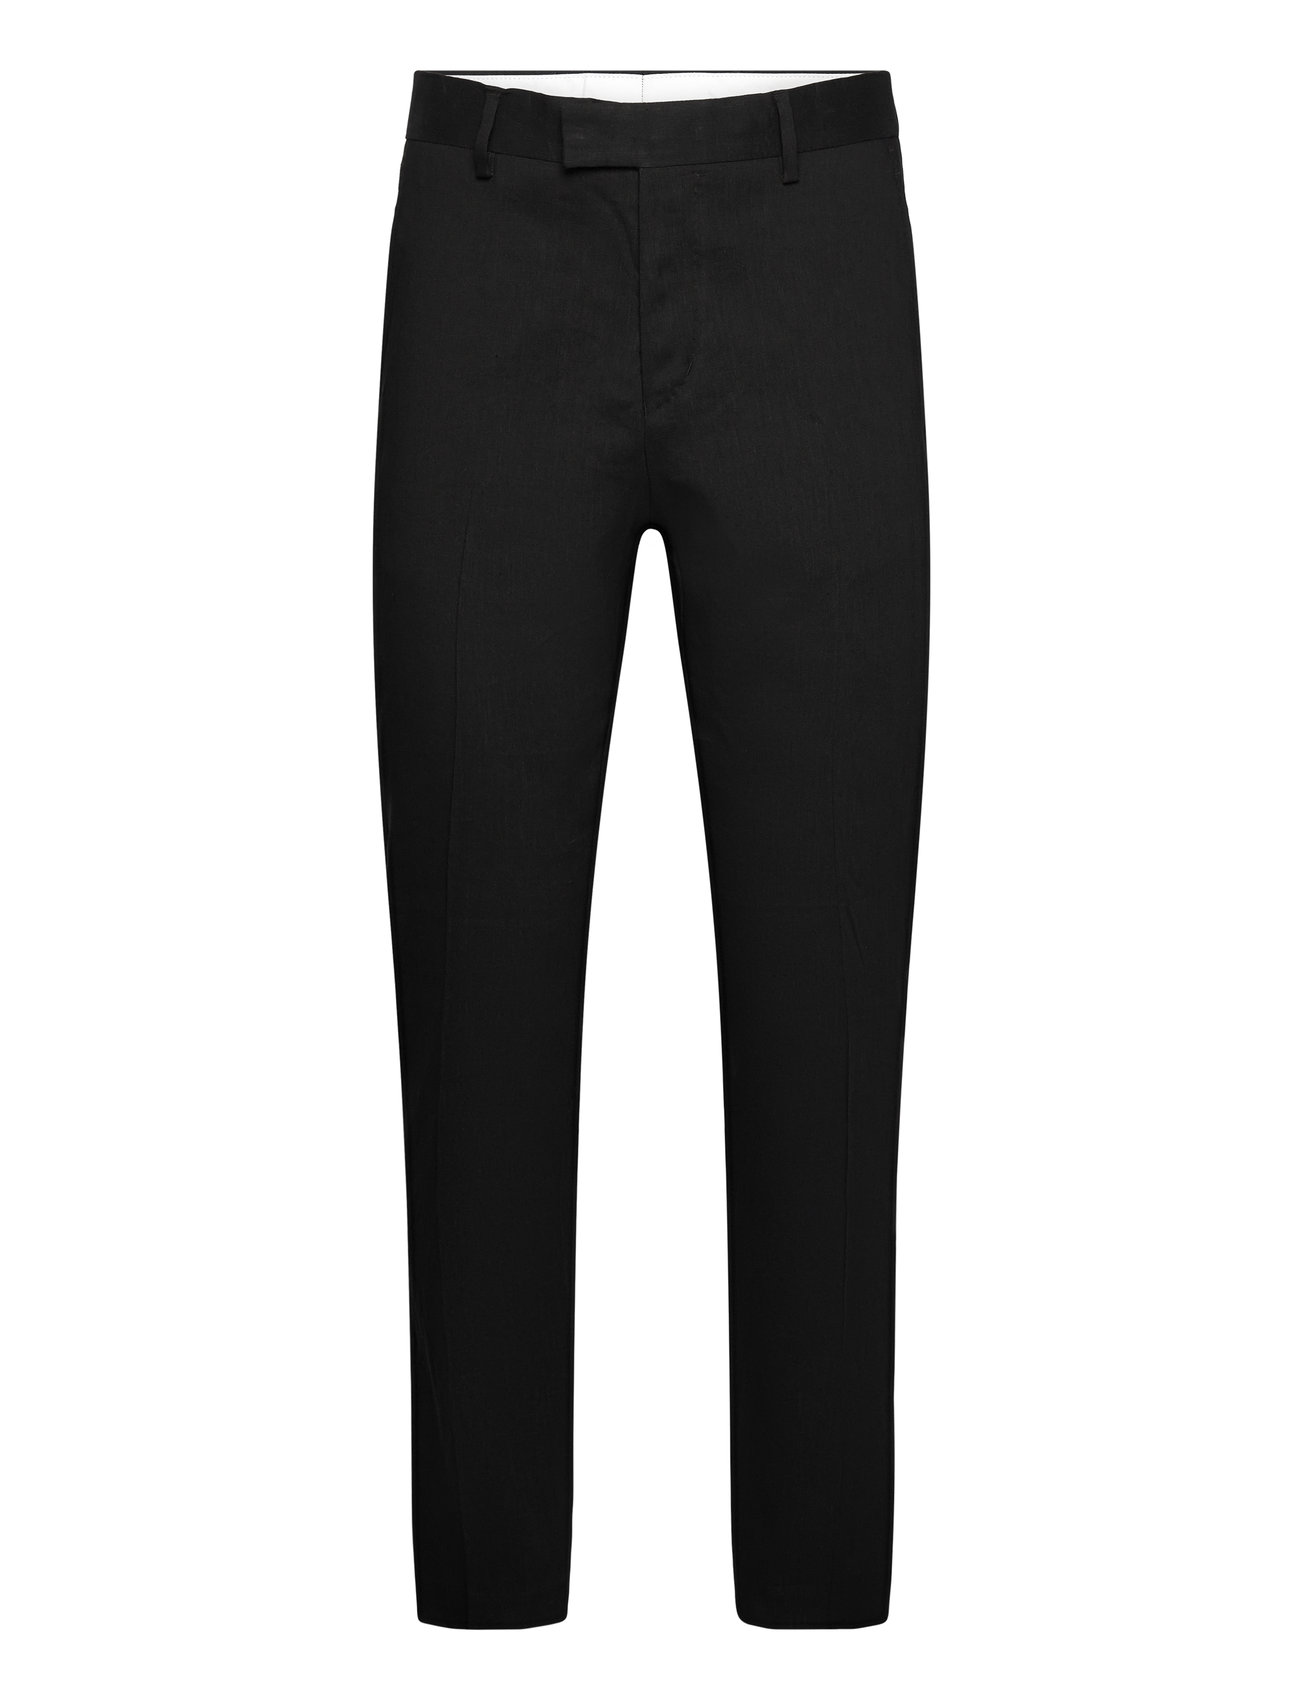 Tense Designers Trousers Chinos Black Tiger Of Sweden